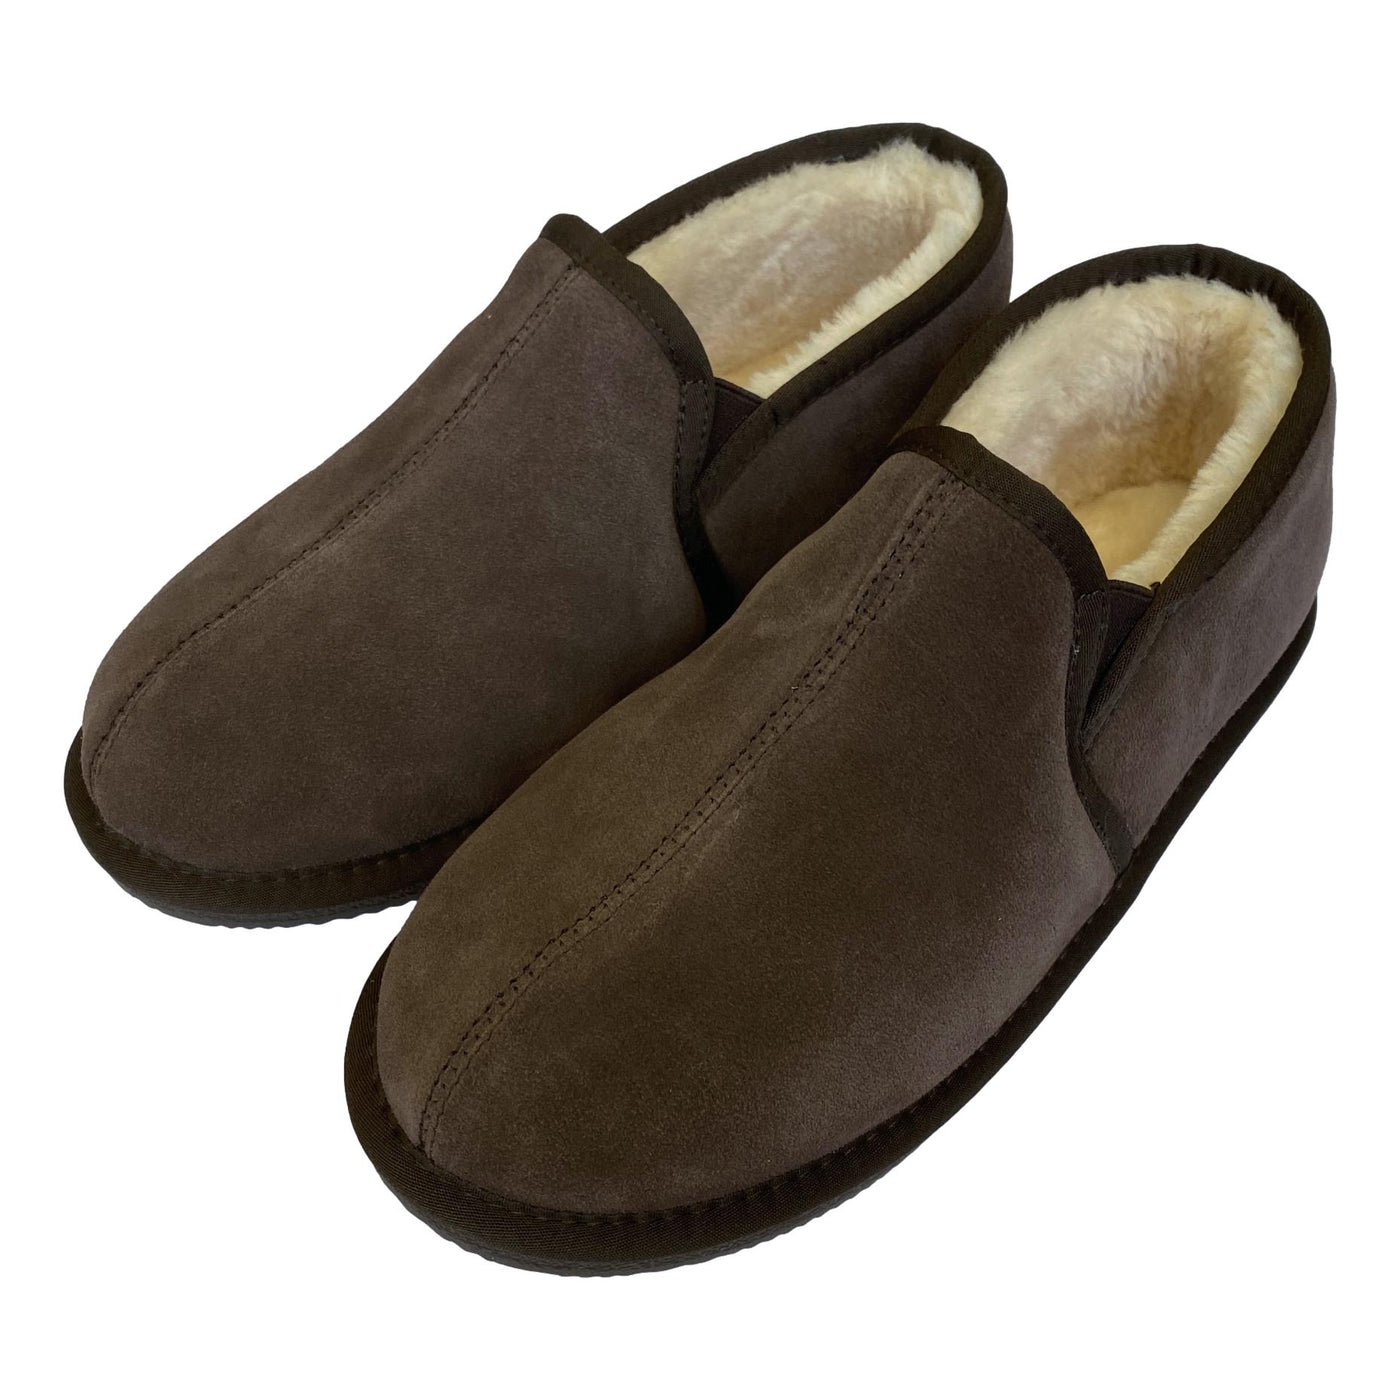 Deluxe Mens 'Elliot' Lambswool Slippers with Hard Sole - Chocolate ...